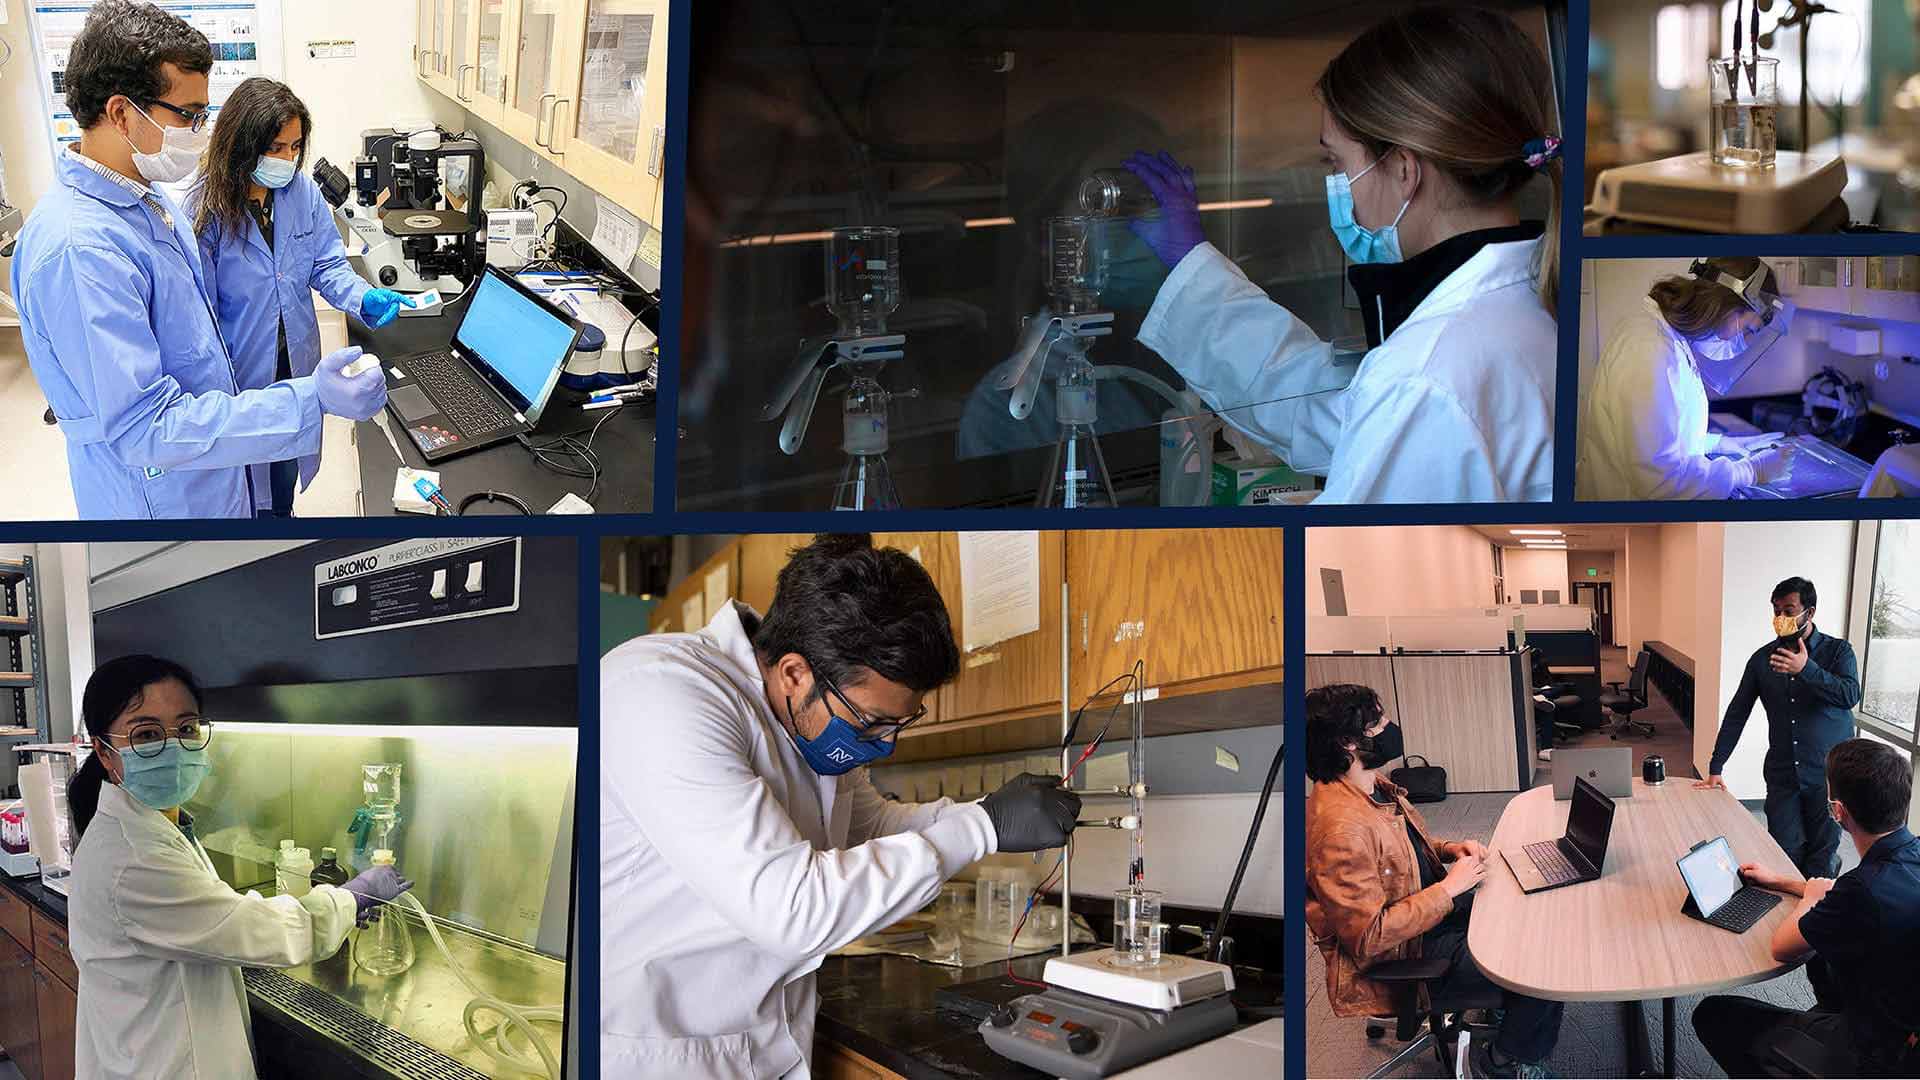 Students and Faculty working in labs and classrooms on COVID-19